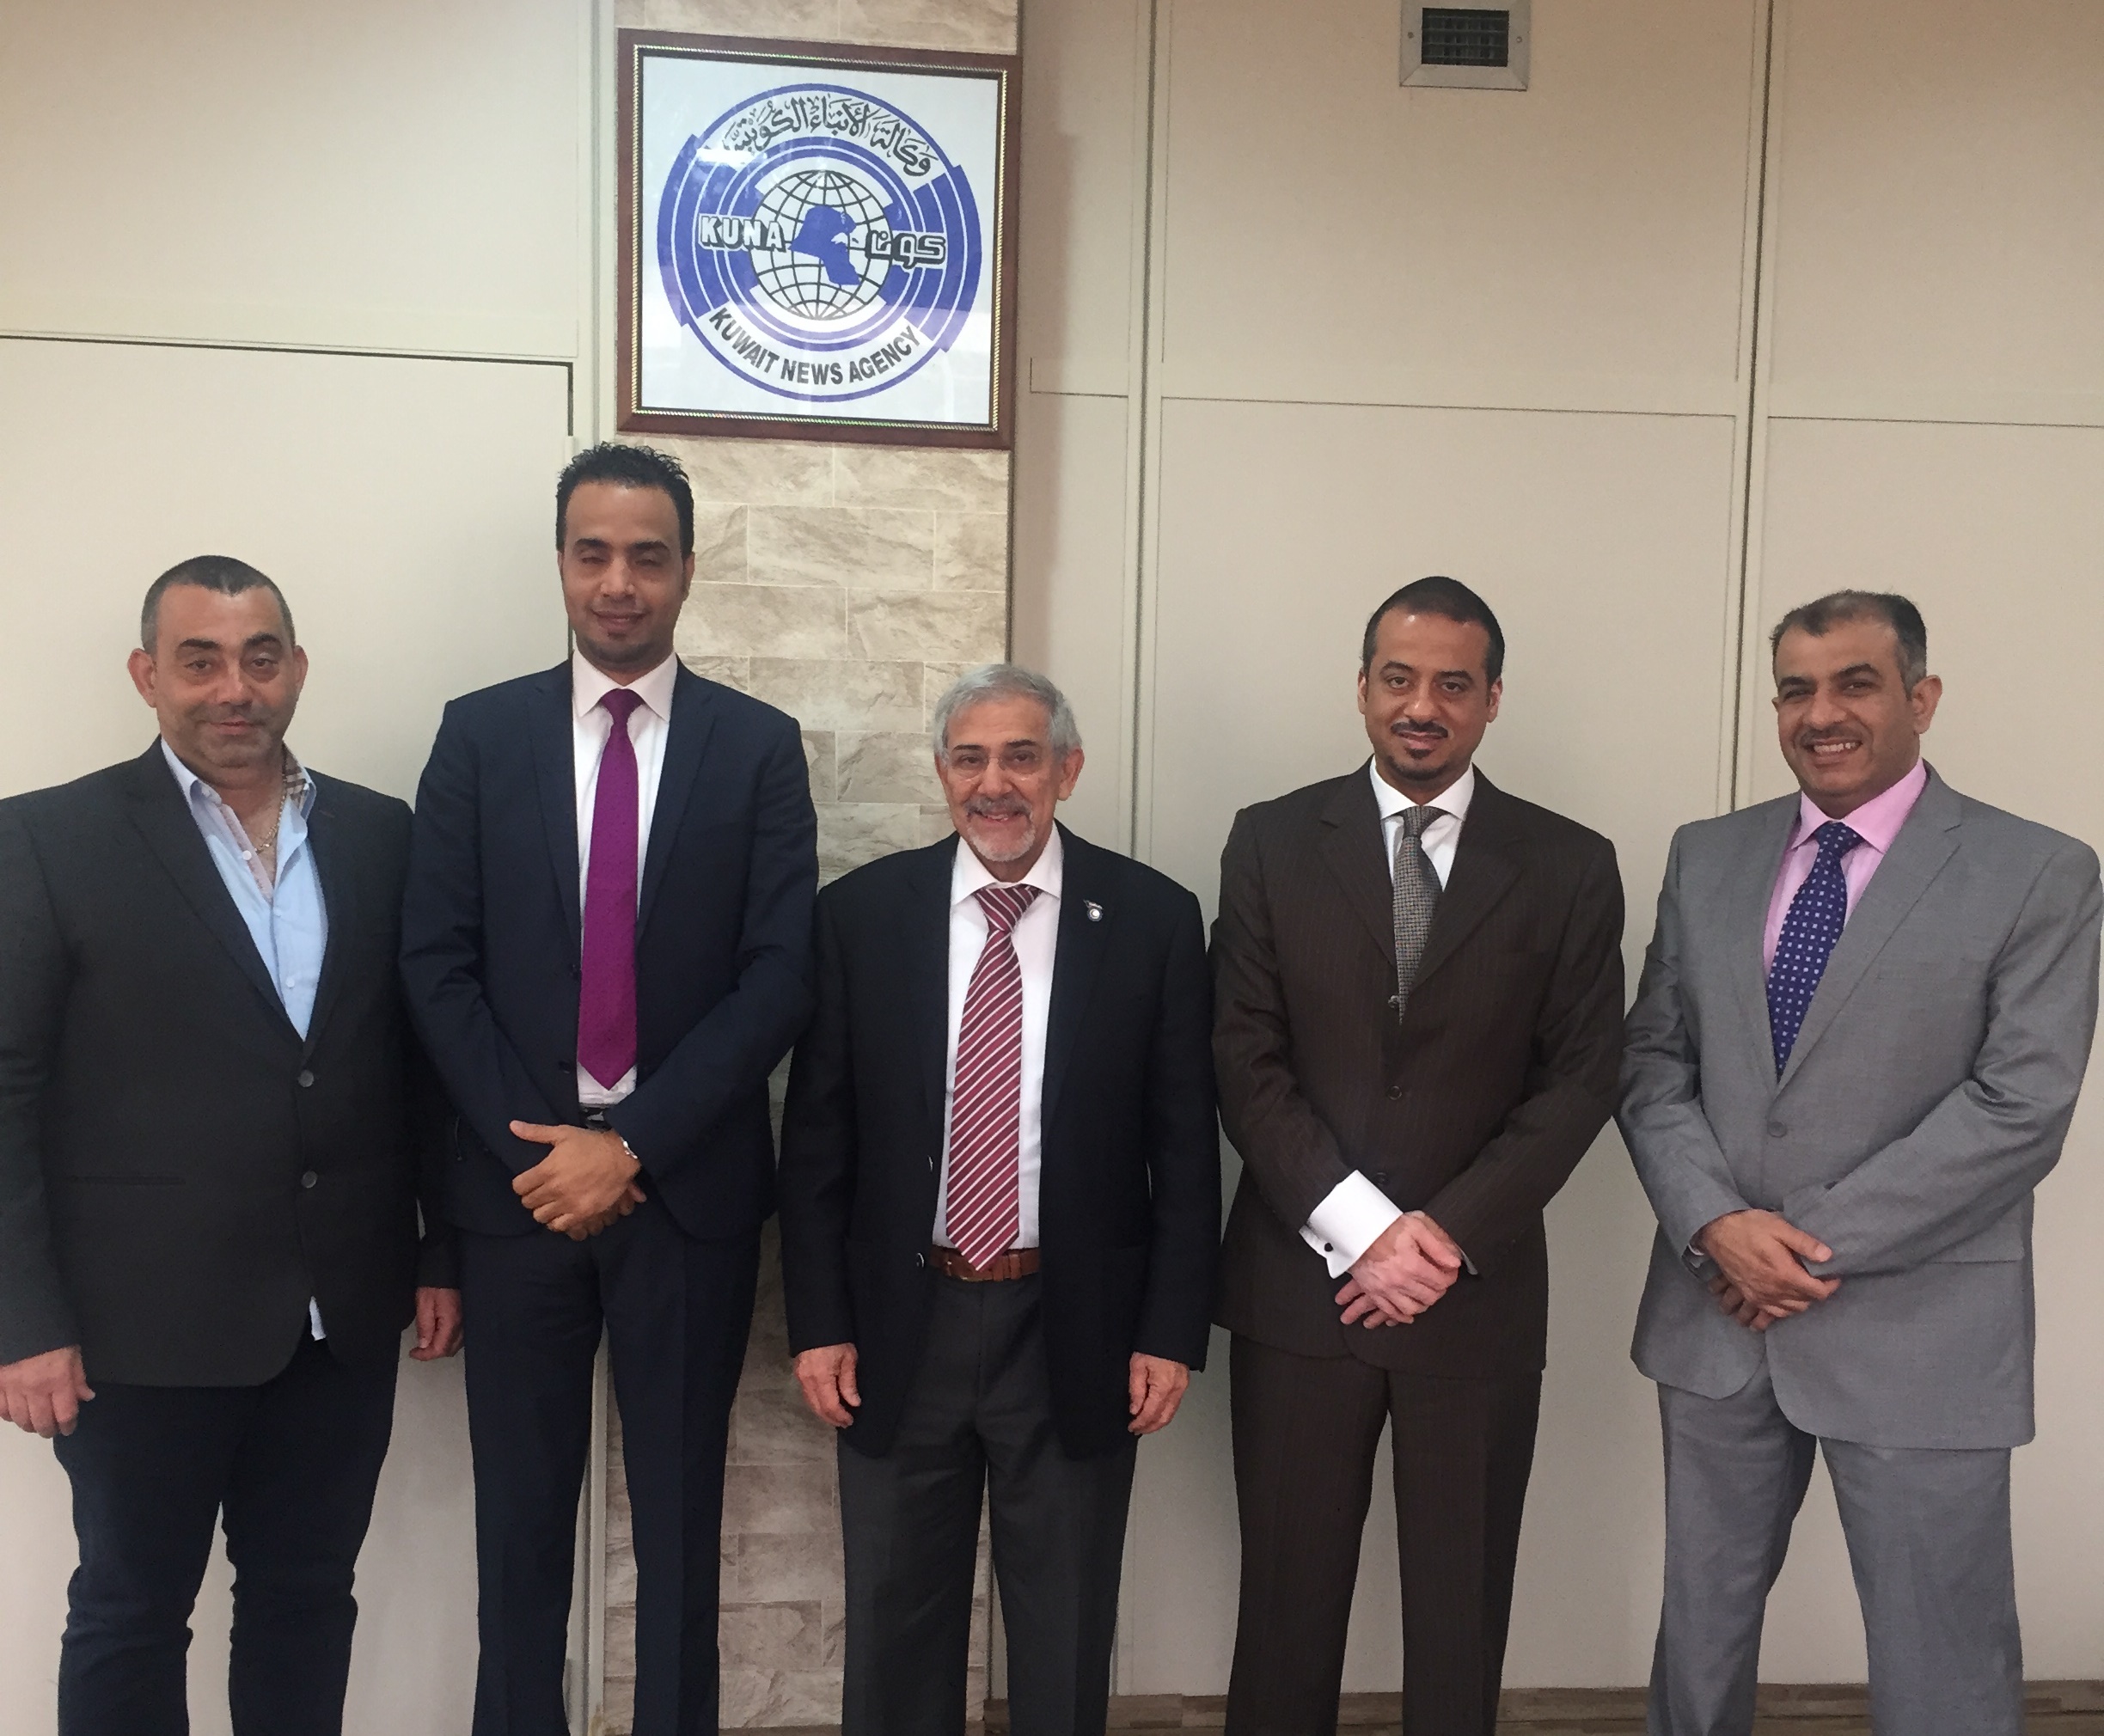 Chairman of Kuwait Red Crescent Society (KRCS) Dr. Hilal Al-Sayer with Kuwait News Agency beareau officials in Beirut